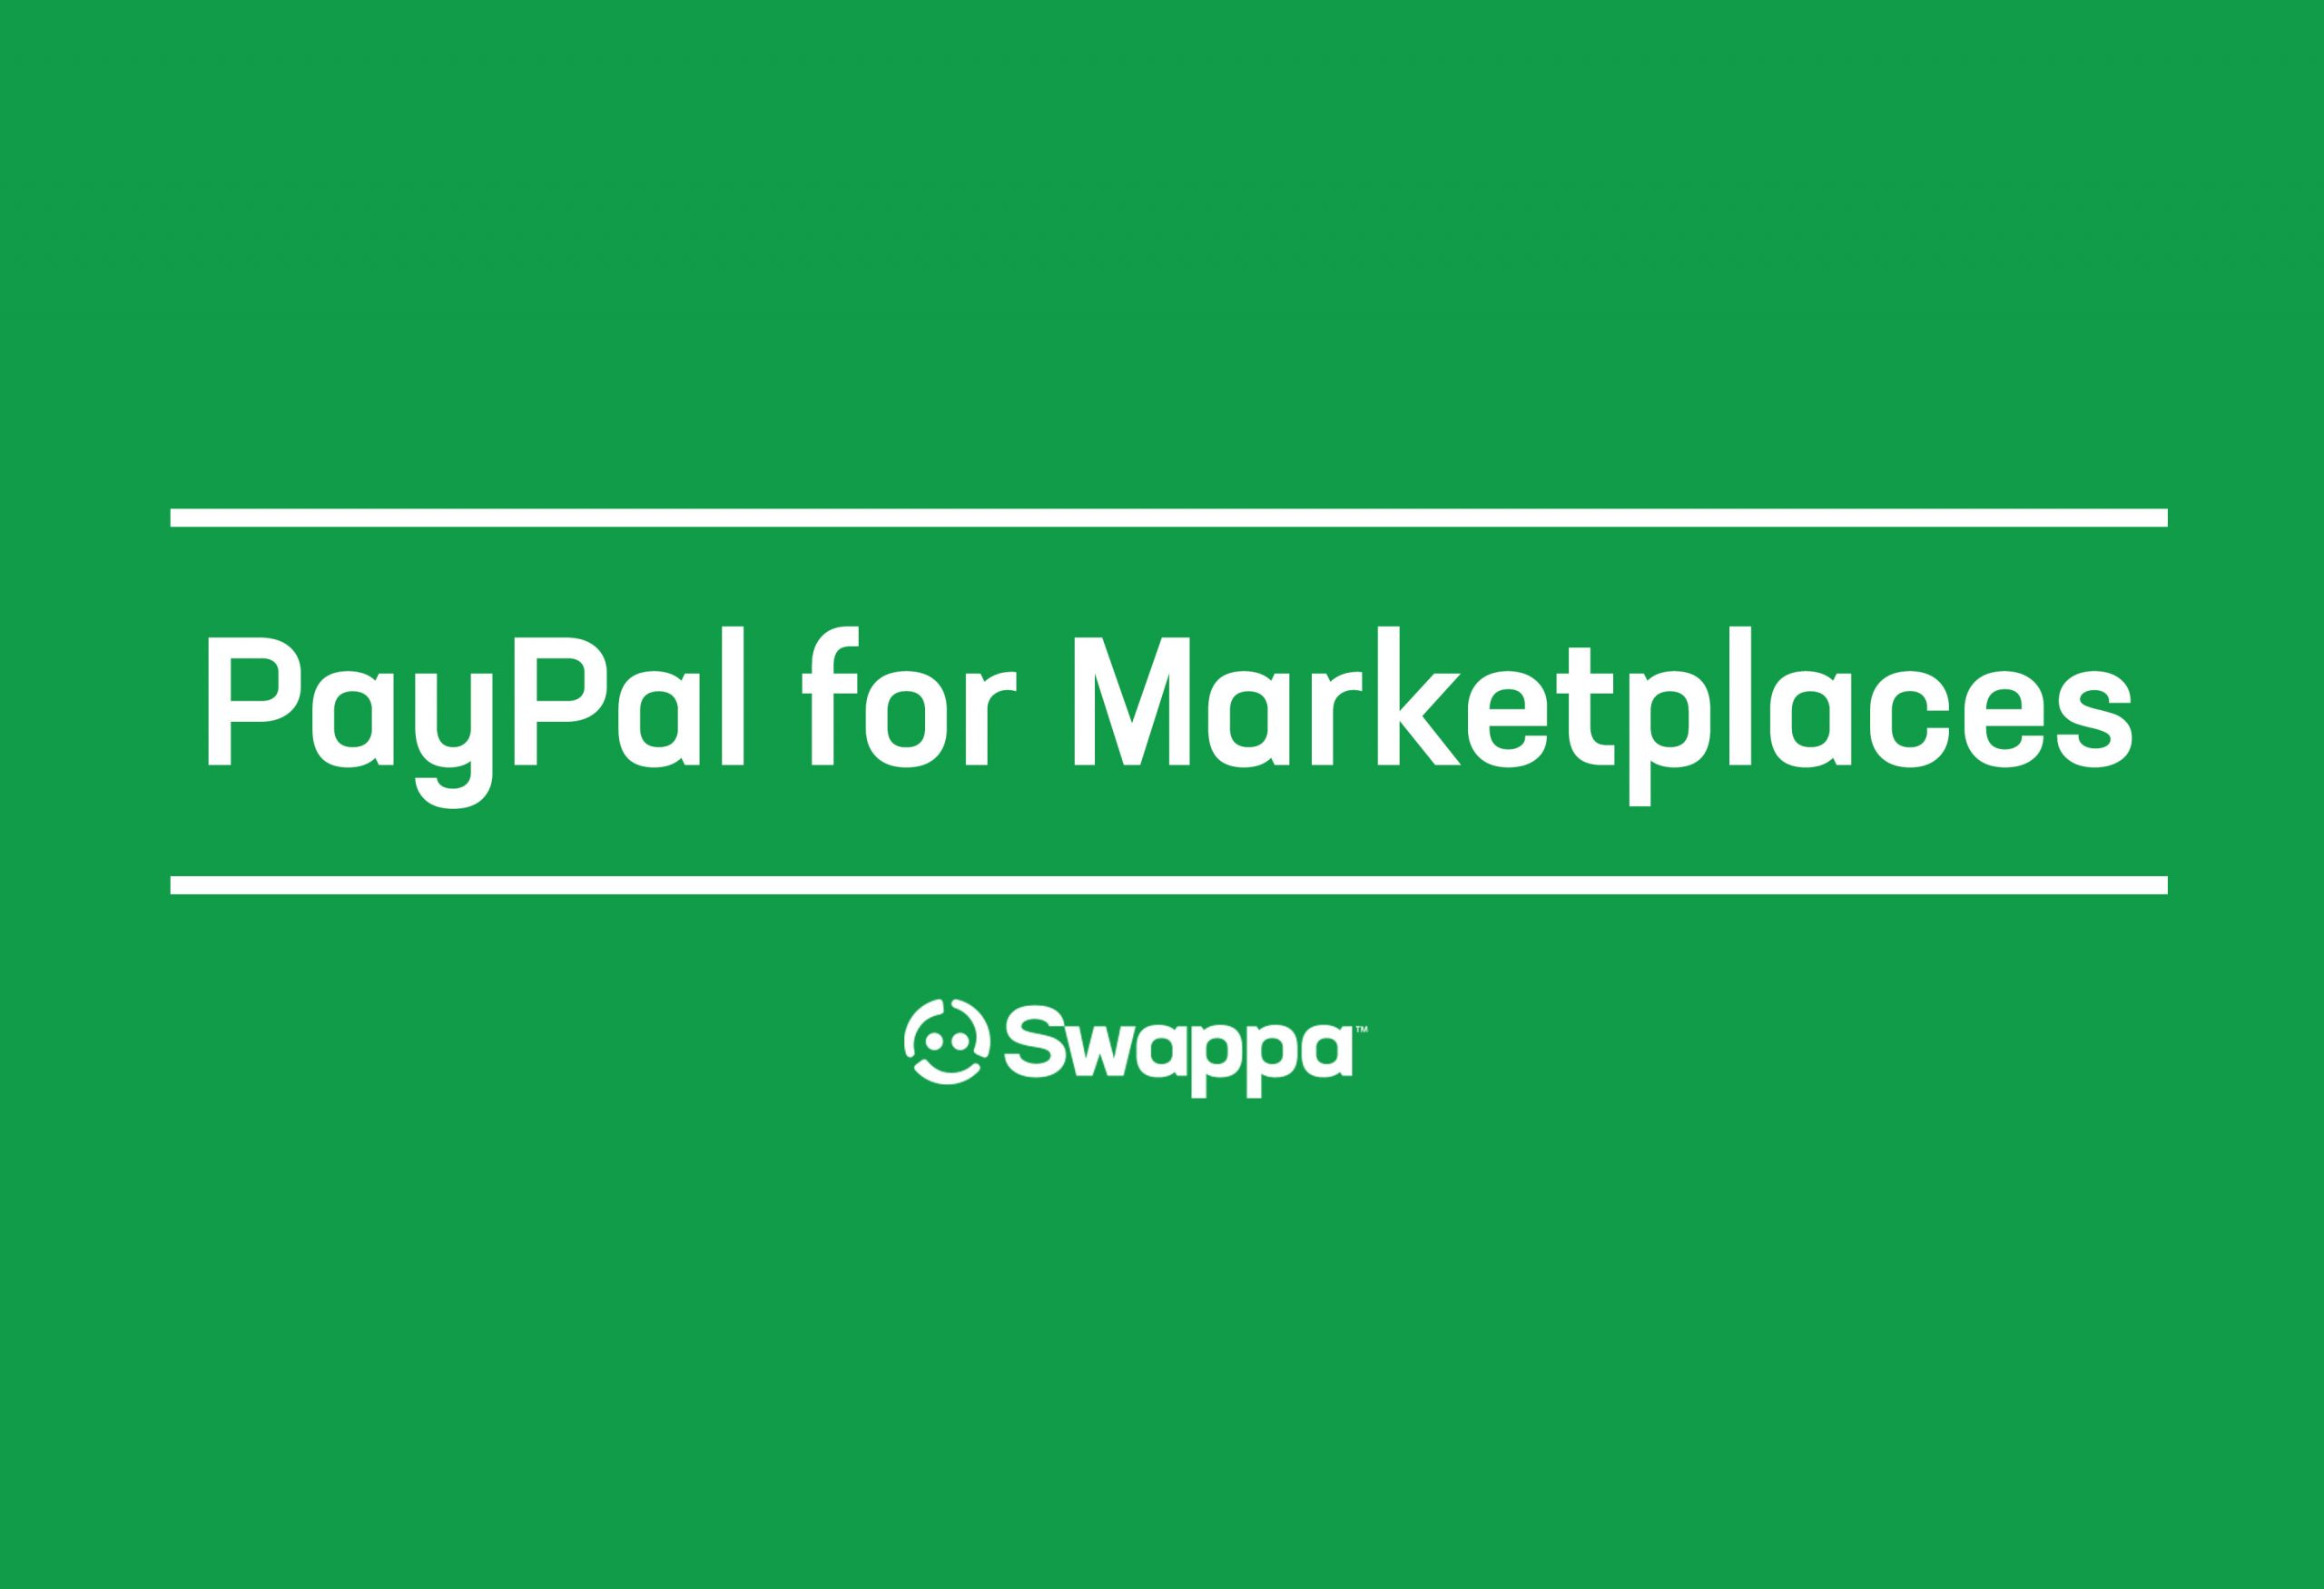 Swappa and PayPal for Marketplaces